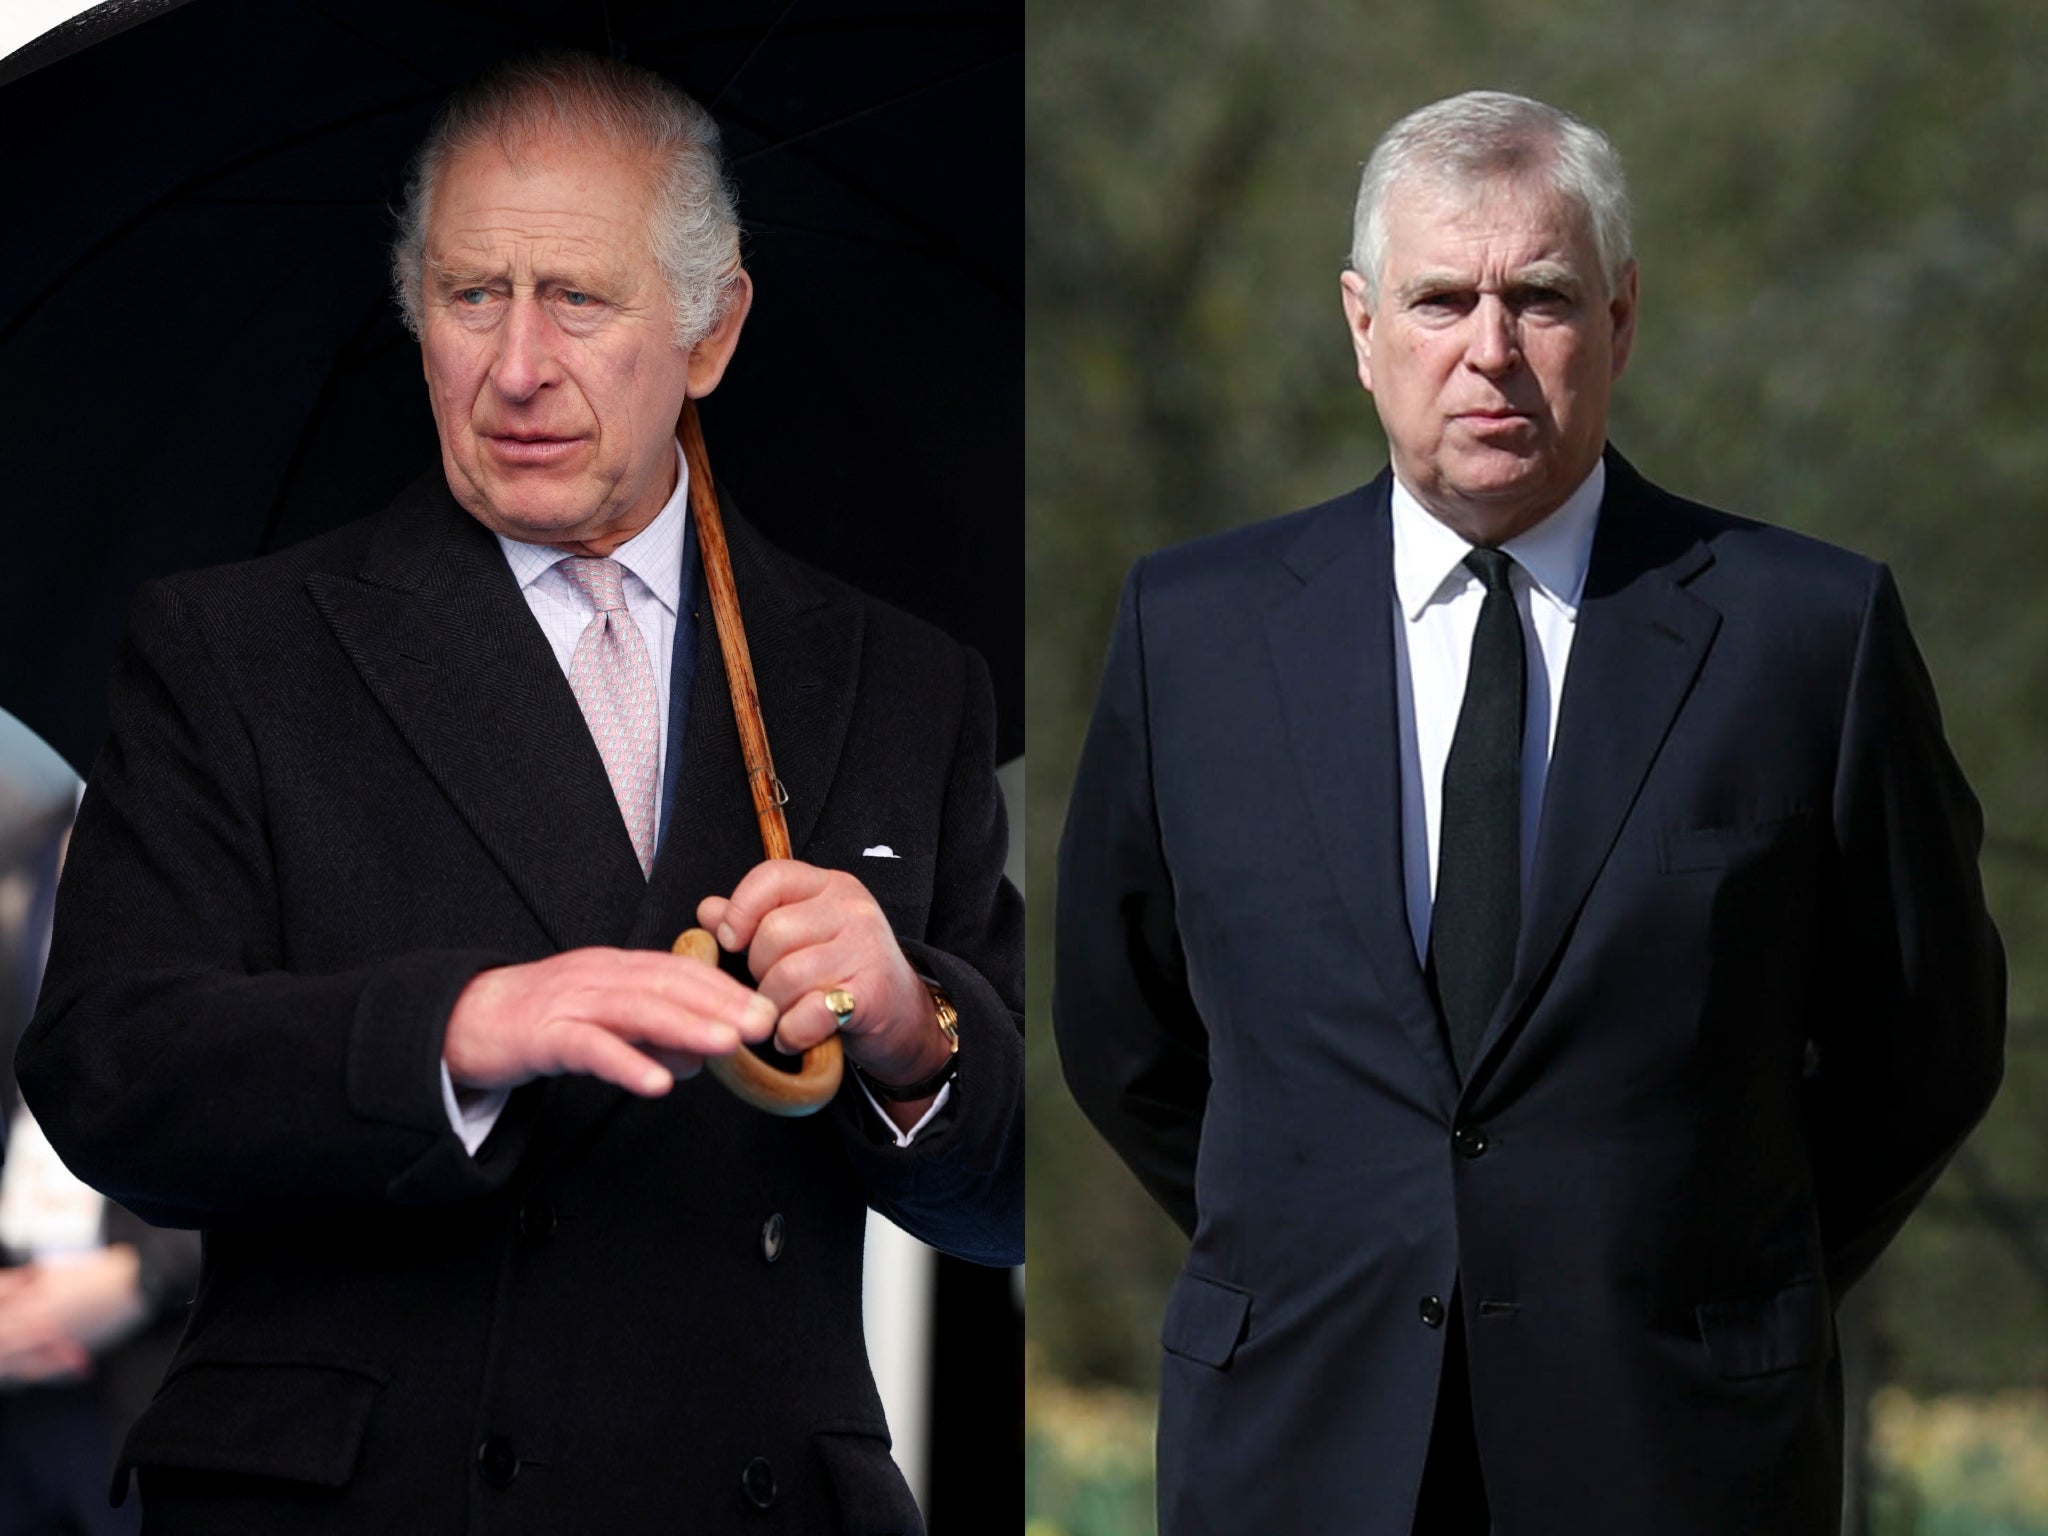 King Charles III and the Duke of York are said to be in disagreement over Prince Andrew’s residence